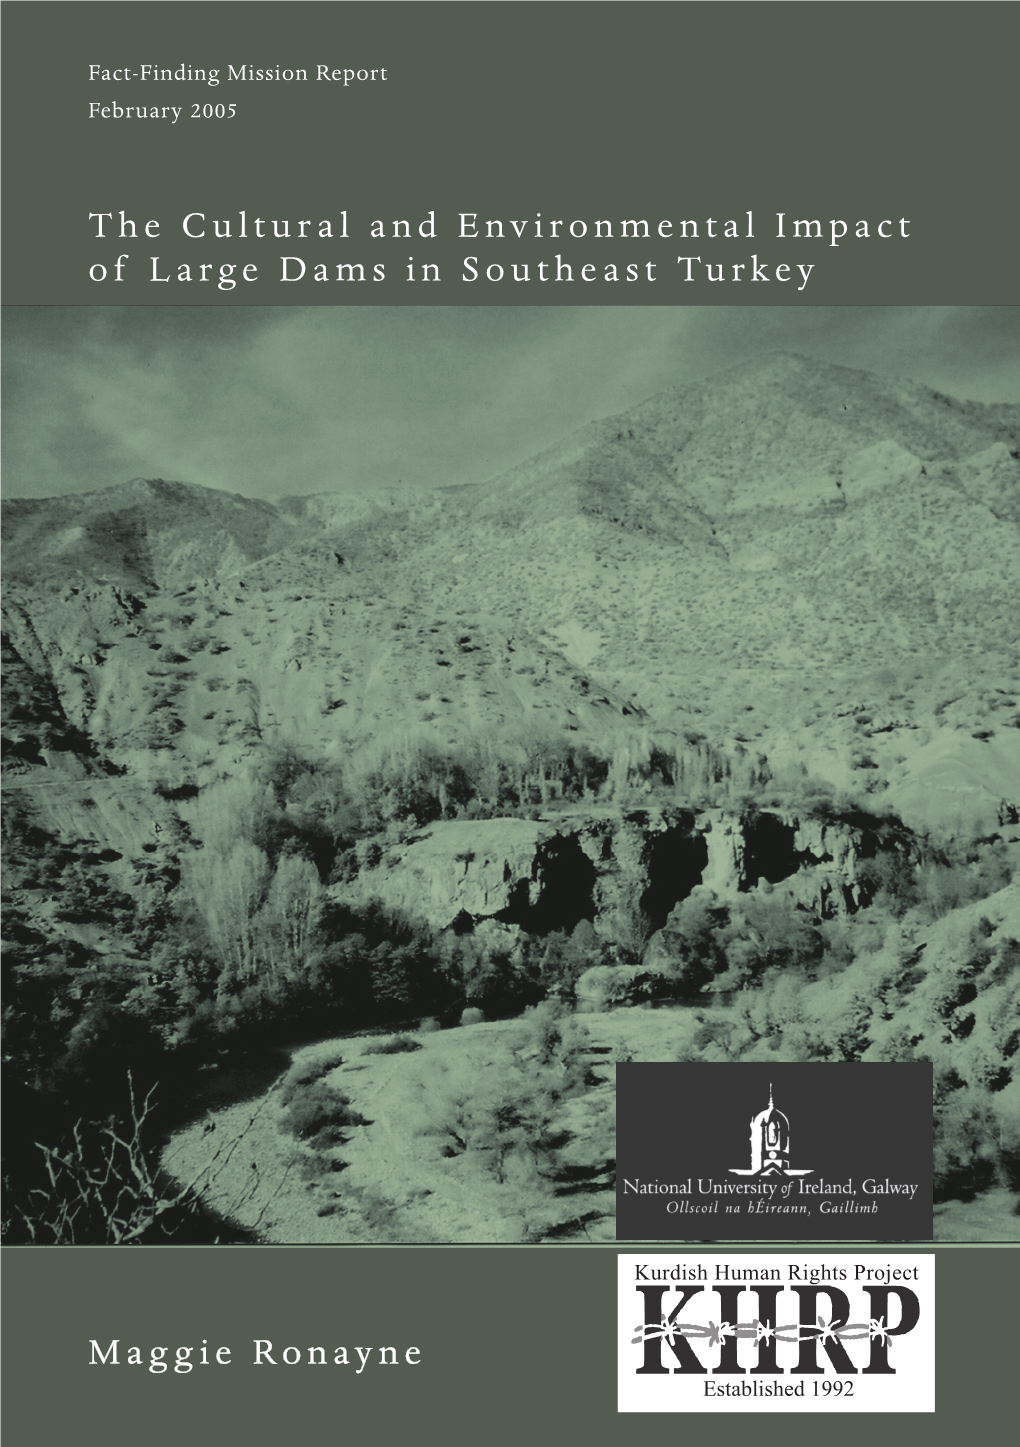 The Cultural and Environmental Impact of Large Dams in Southeast Turkey